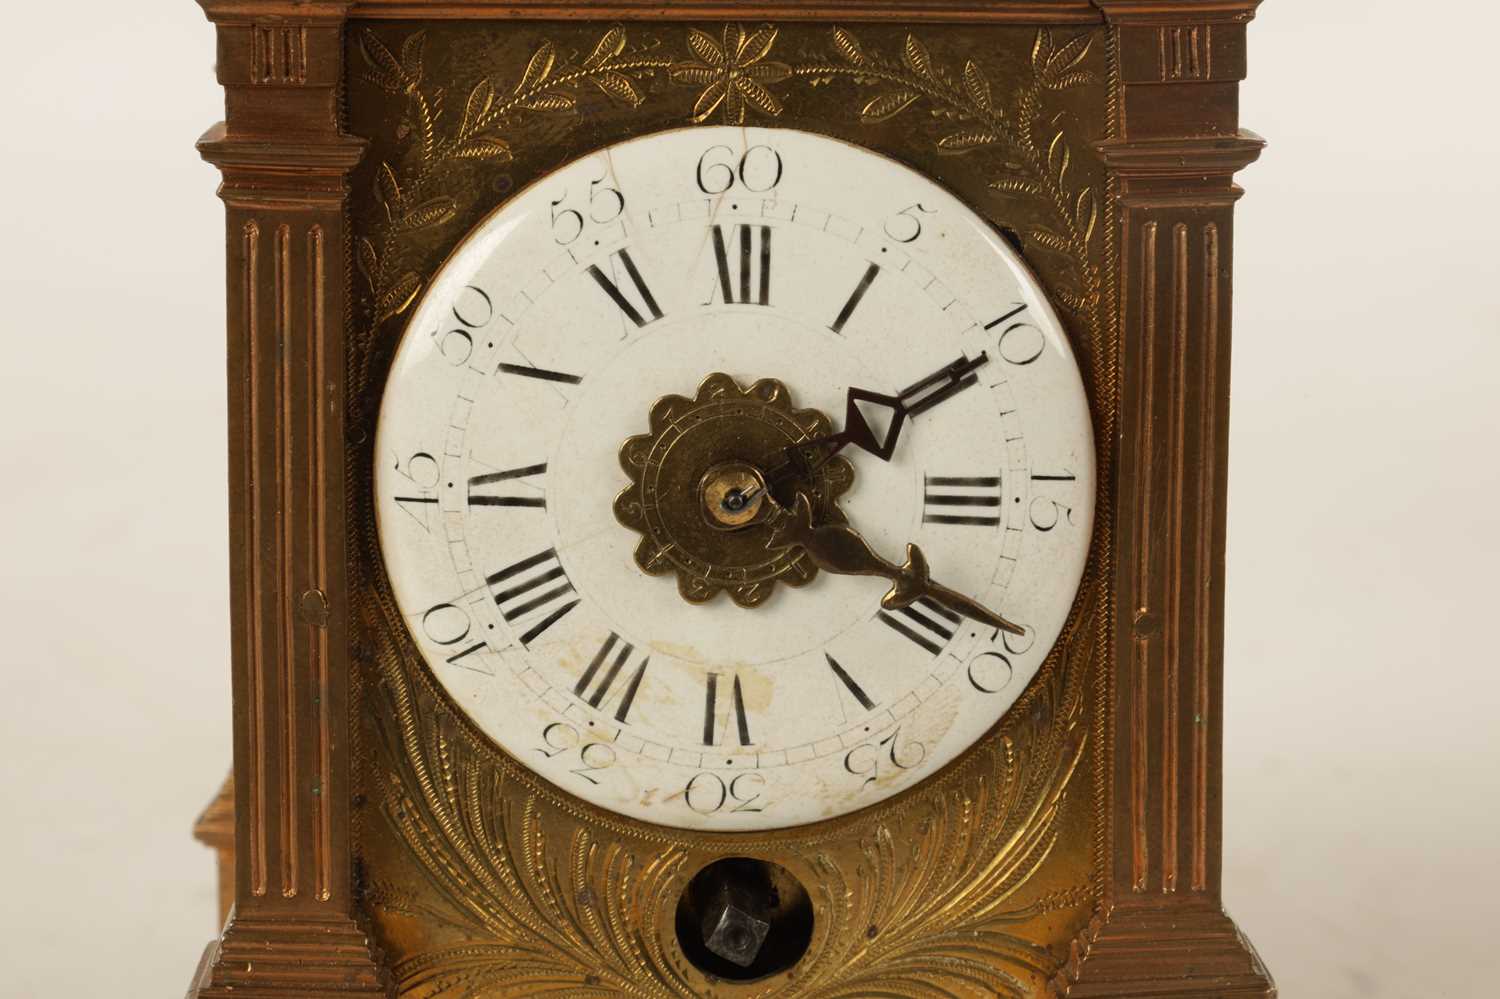 AN EARLY 19TH CENTURY FRENCH CAPUCINE STYLE CARRIAGE/MANTEL CLOCK - Image 3 of 9